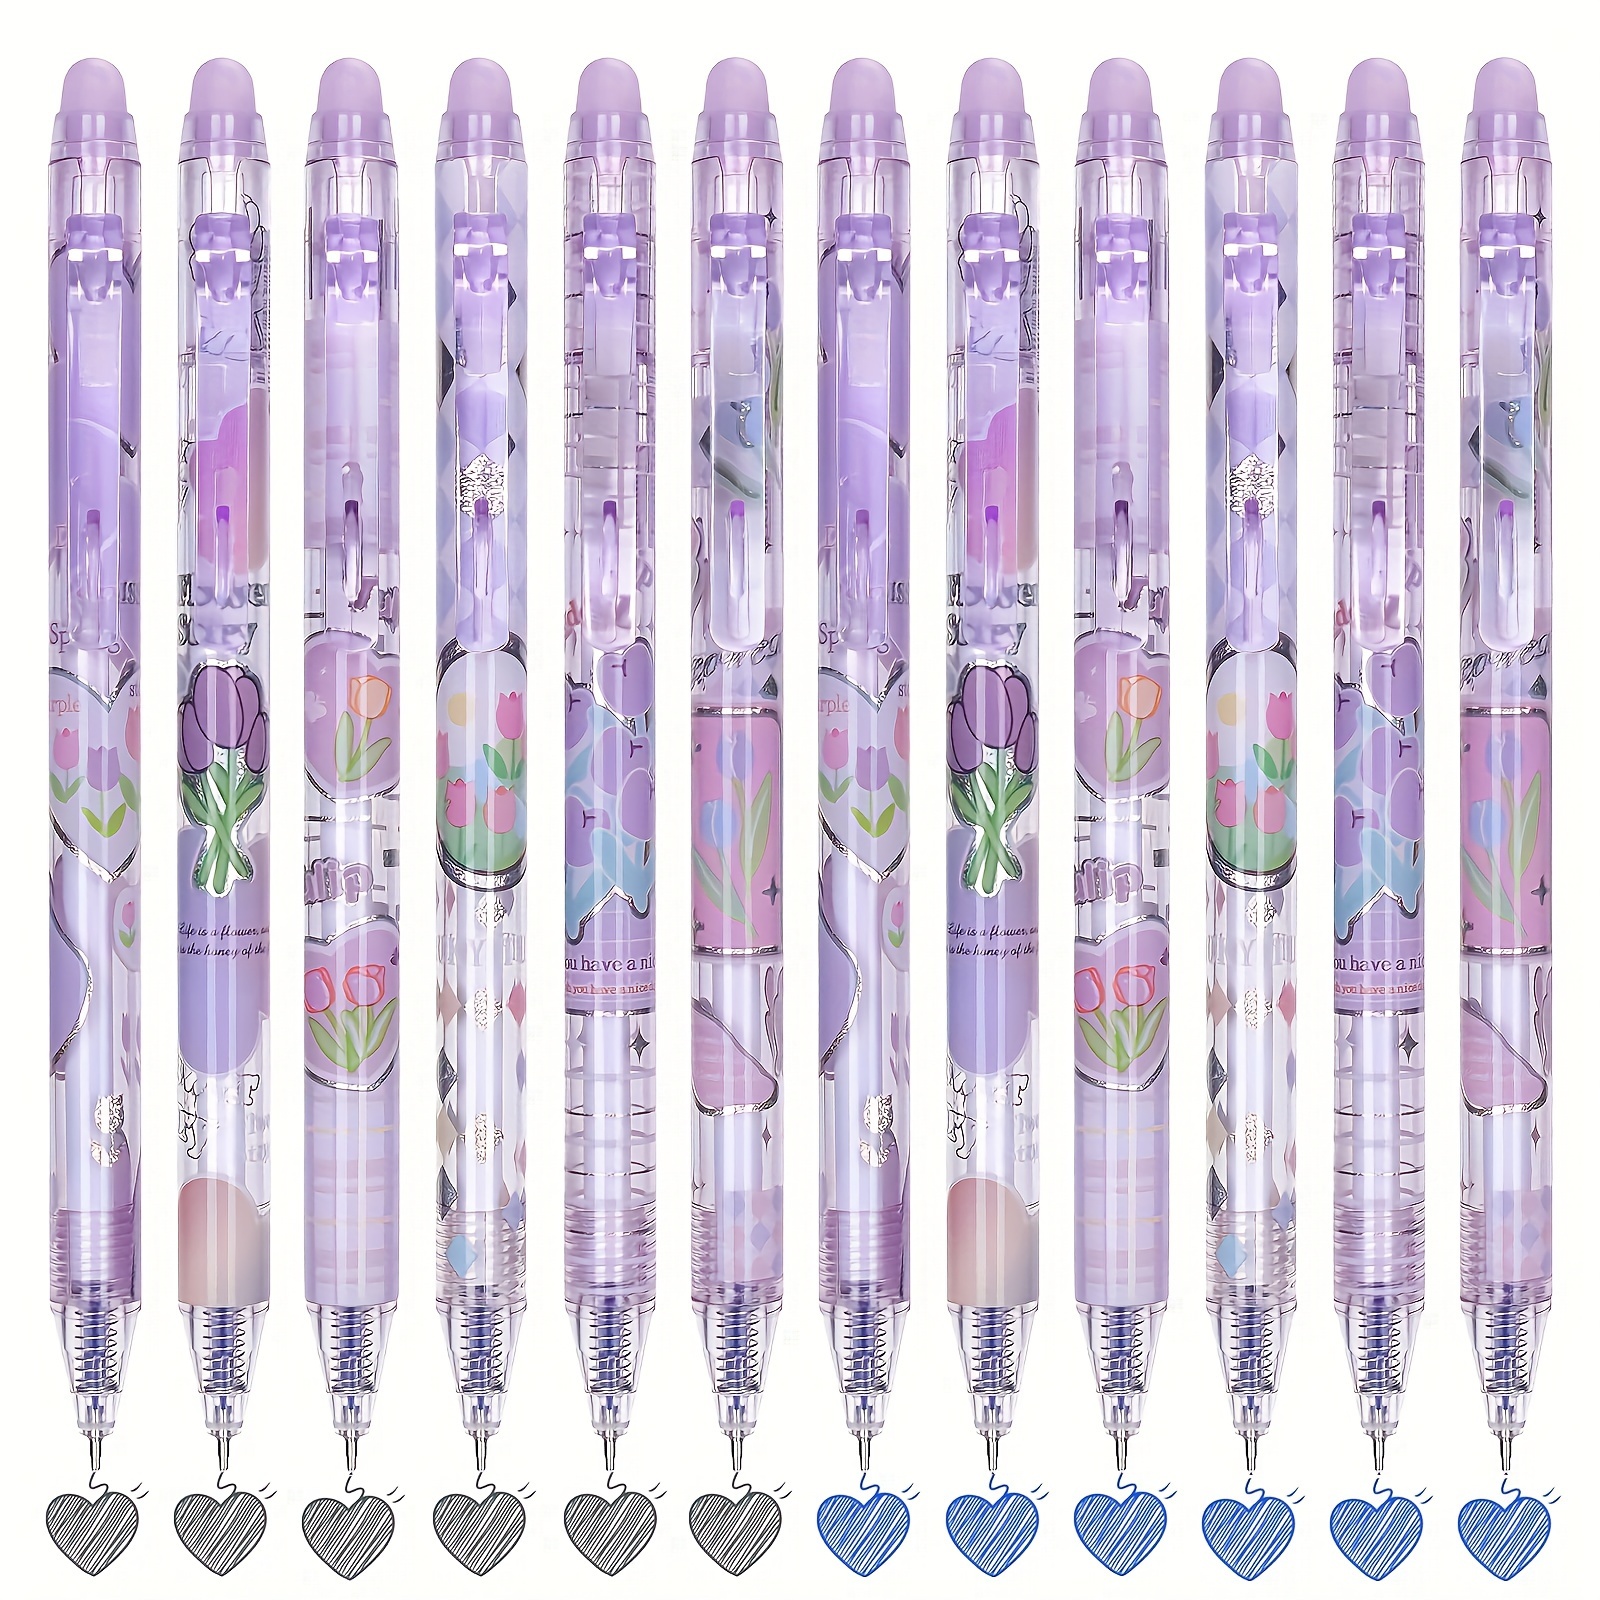 

6pcs Erasable Gel Ink Pens, Retractable Pens Flower Pens 0.5mm Fine Point Pen Make Mistakes Disappear, Office Home Stationery Supplies Pens (black And Blue Ink-tulip)